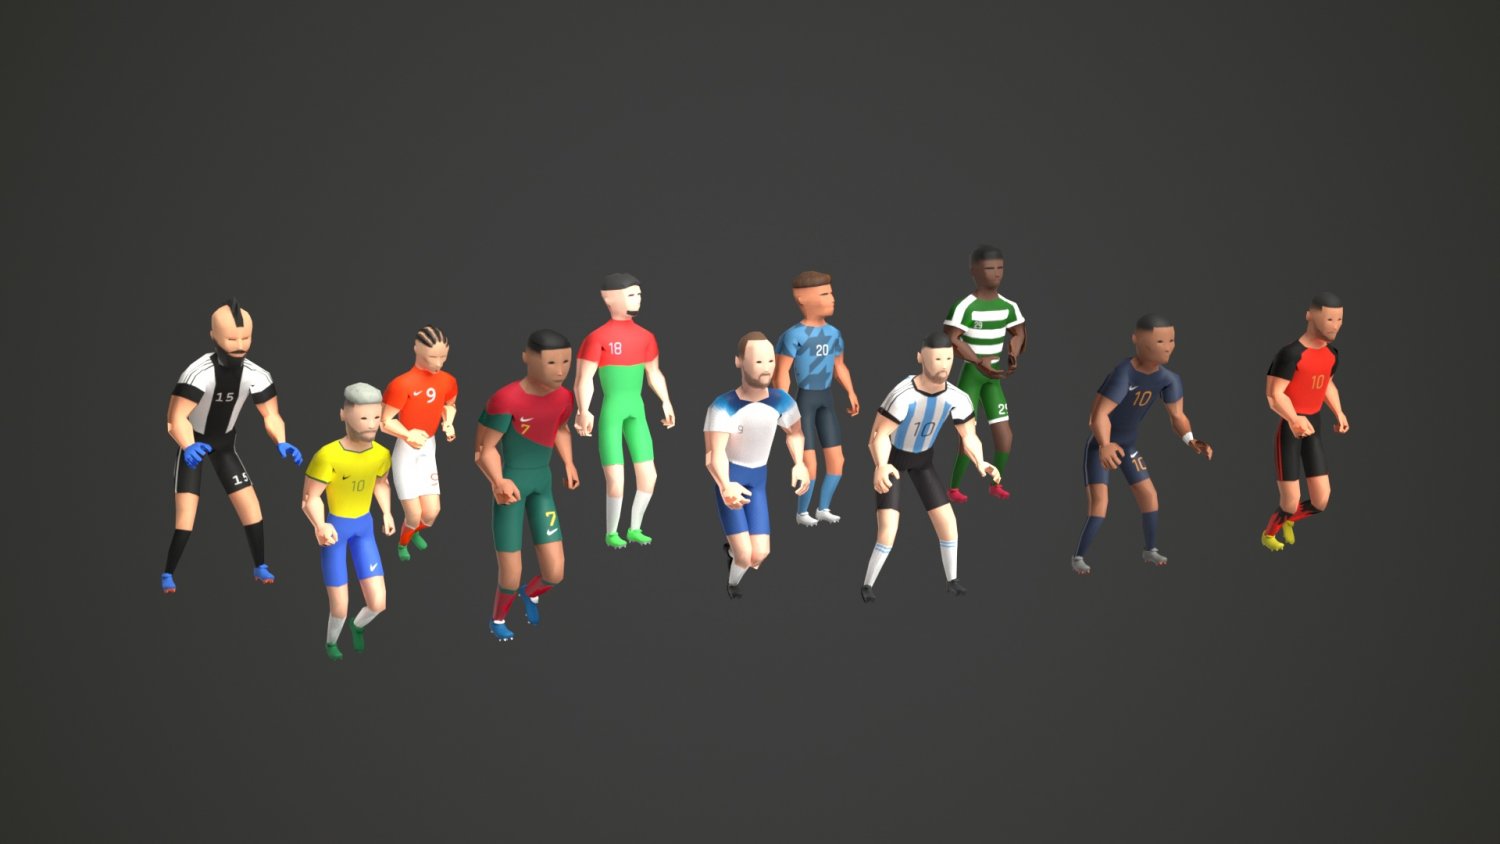 Stick Soccer 3D: Play Free Online at Reludi